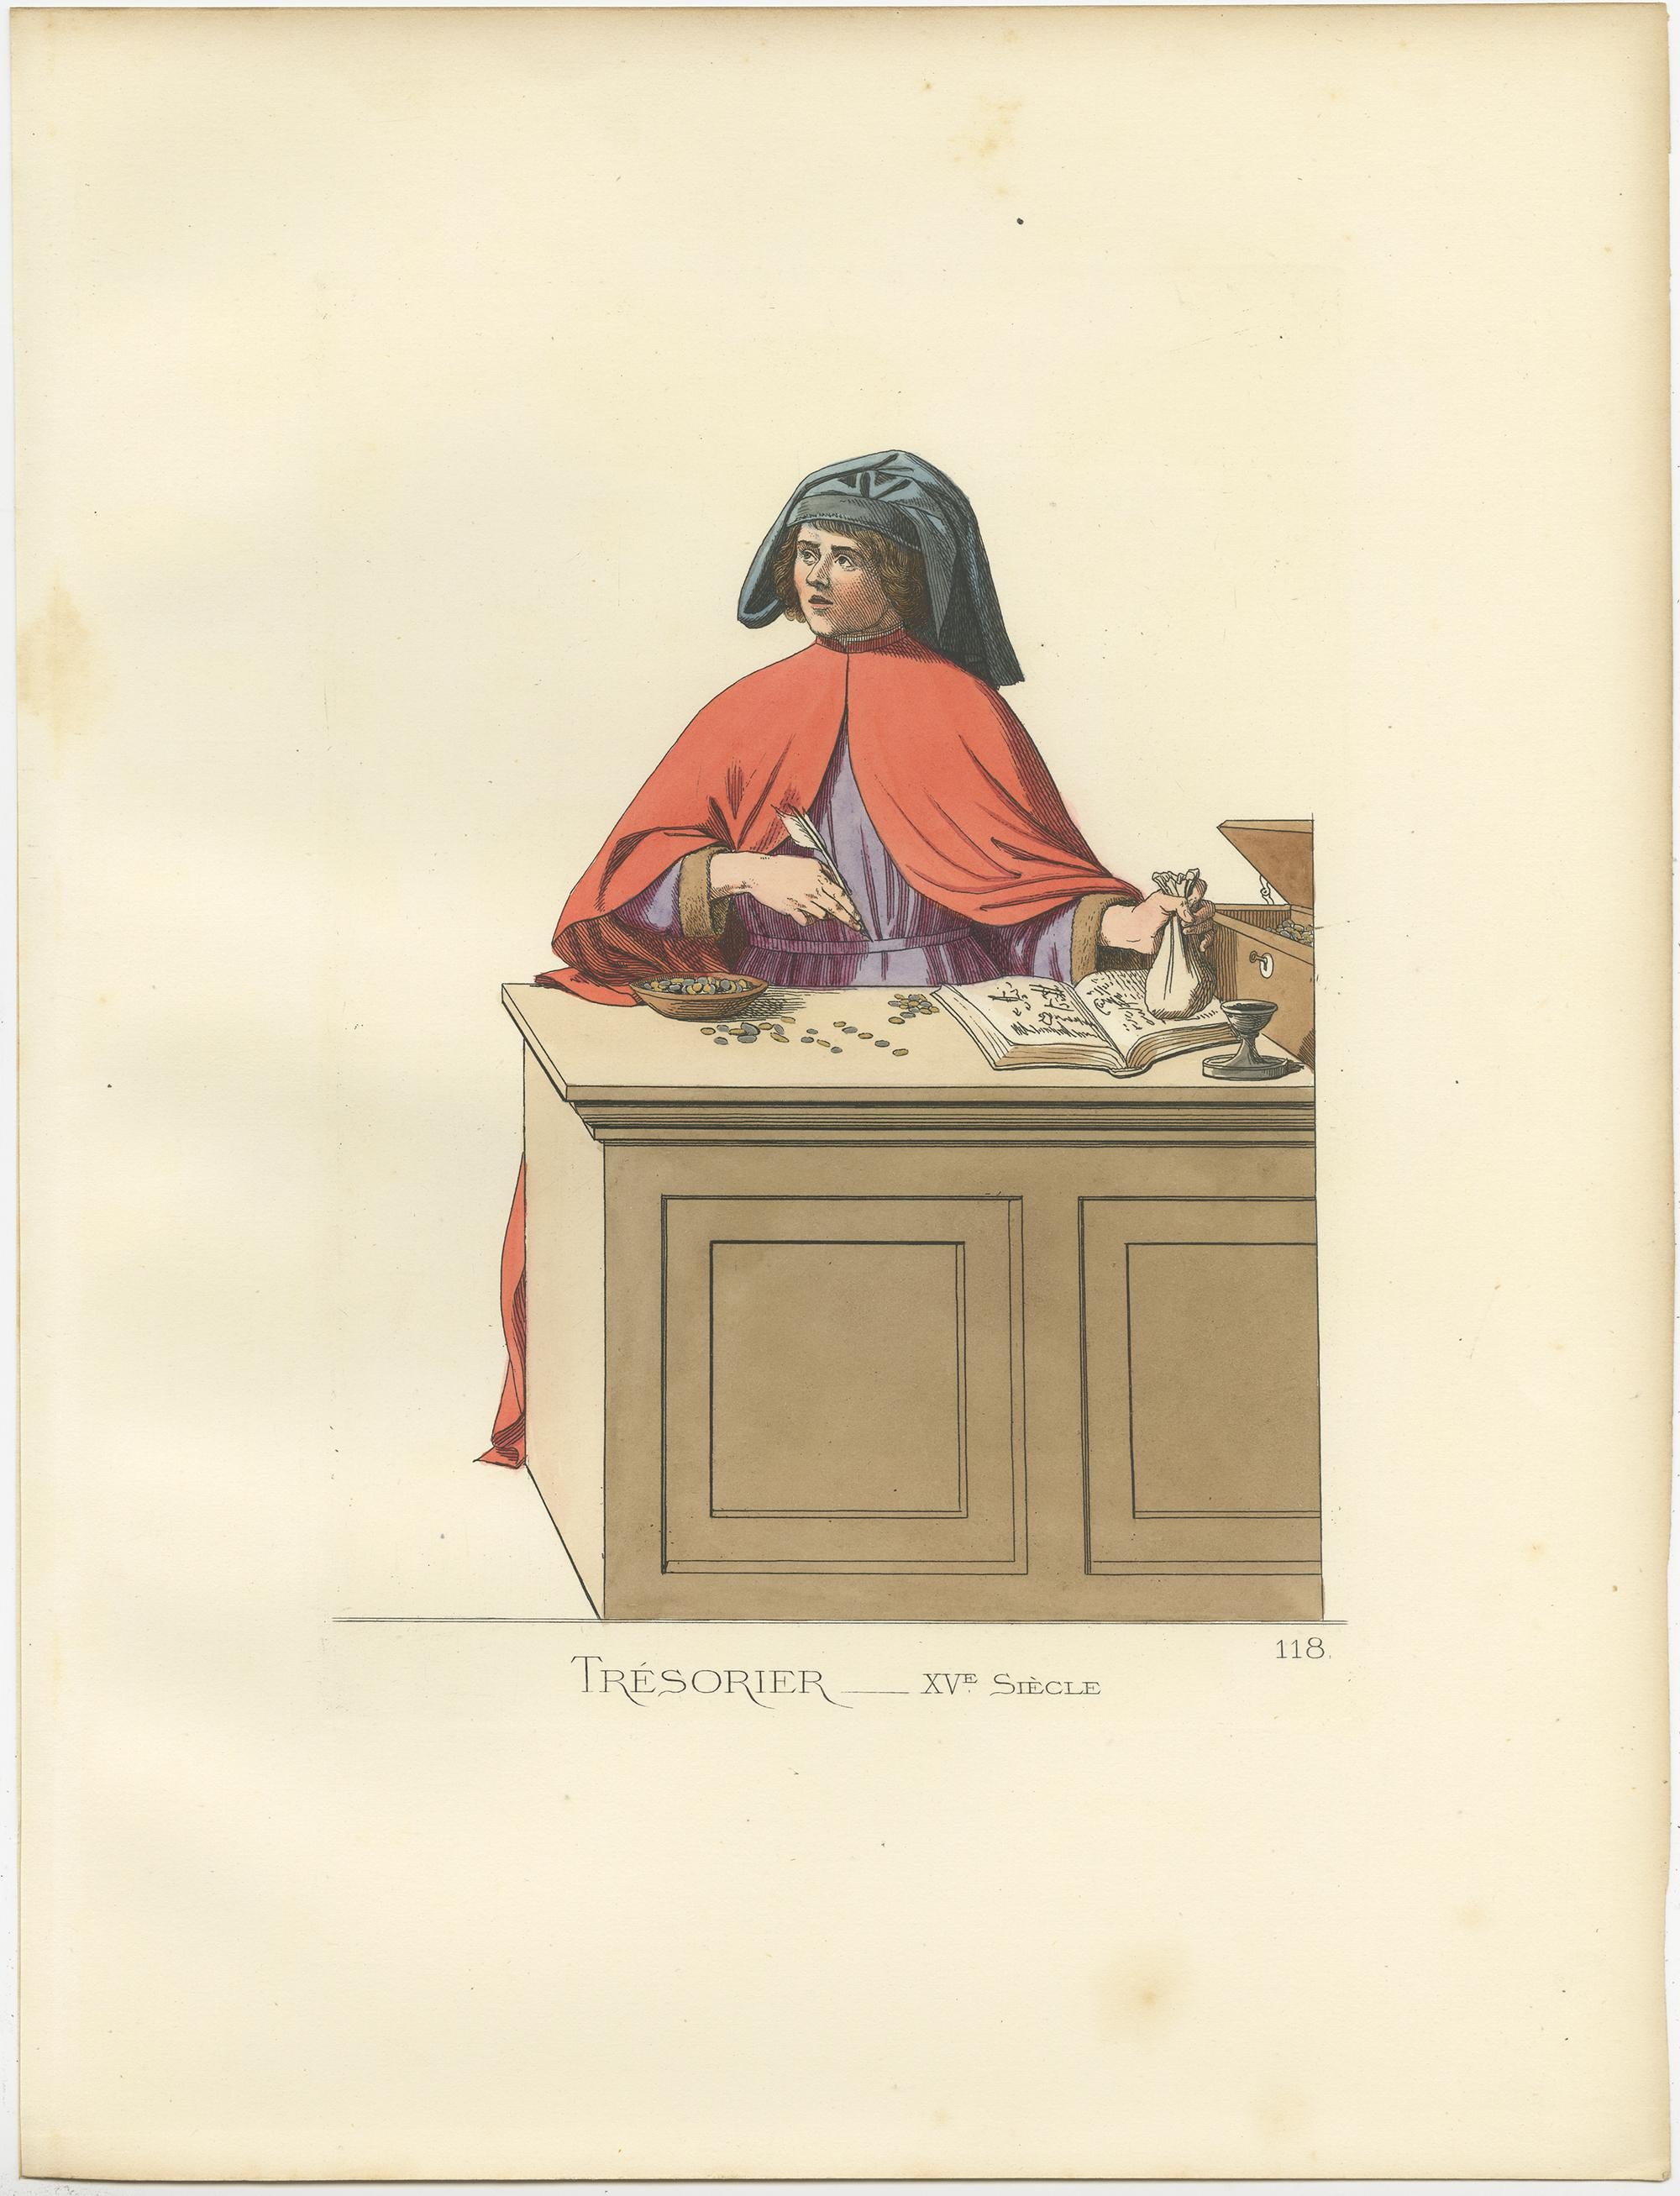 19th Century Antique Print of a Treasurer/Bookkeeper, 15th Century, by Bonnard, 1860 For Sale